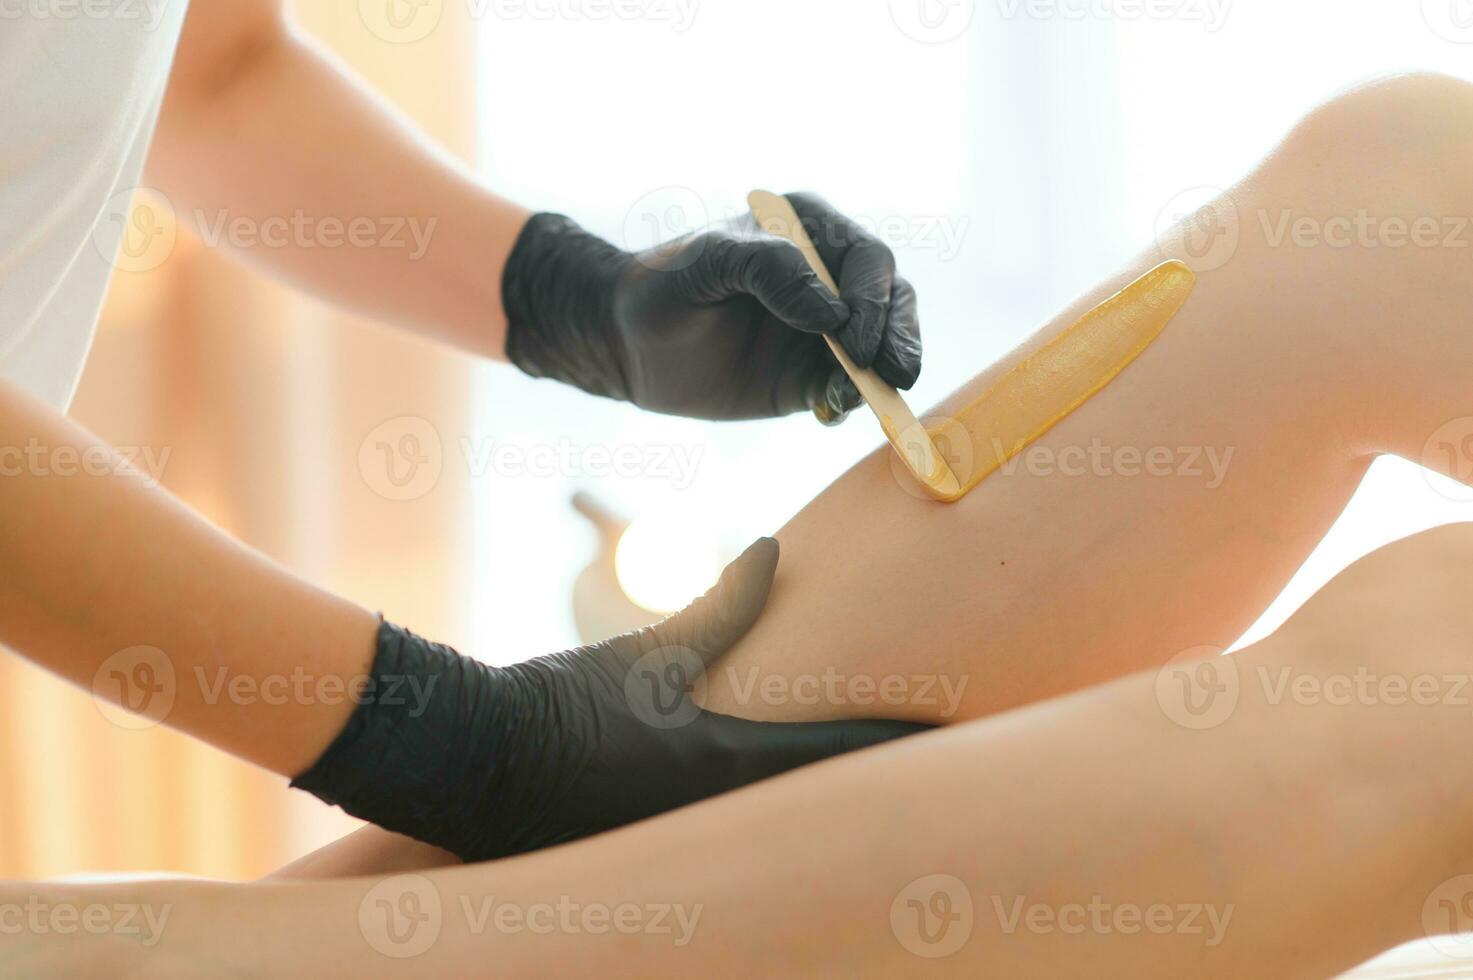 Sugaring epilation skin care with liquid sugar at legs close-up. Beauty and cosmetology concept. photo